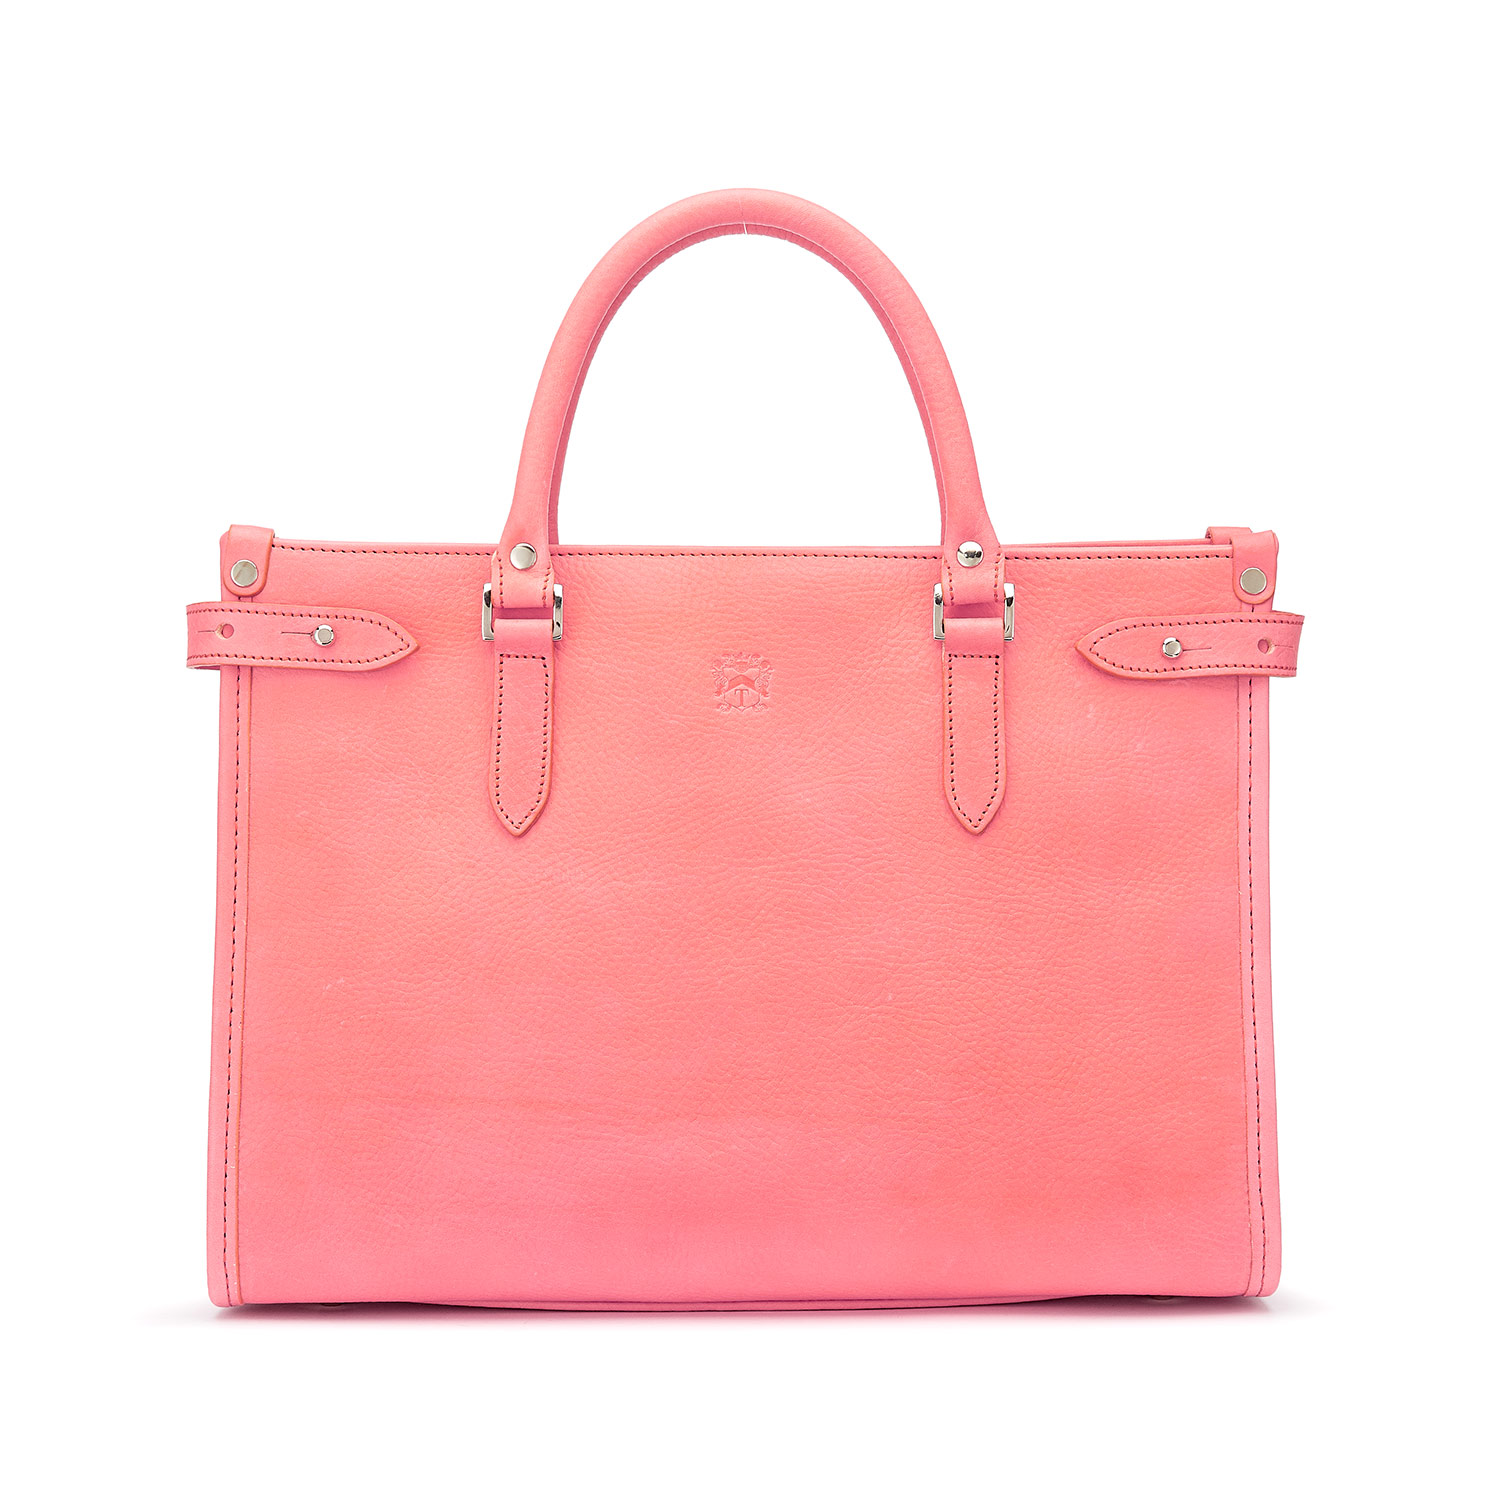 Shop the Tusting Kimbolton Leather Handbag direct from the Manufacturer